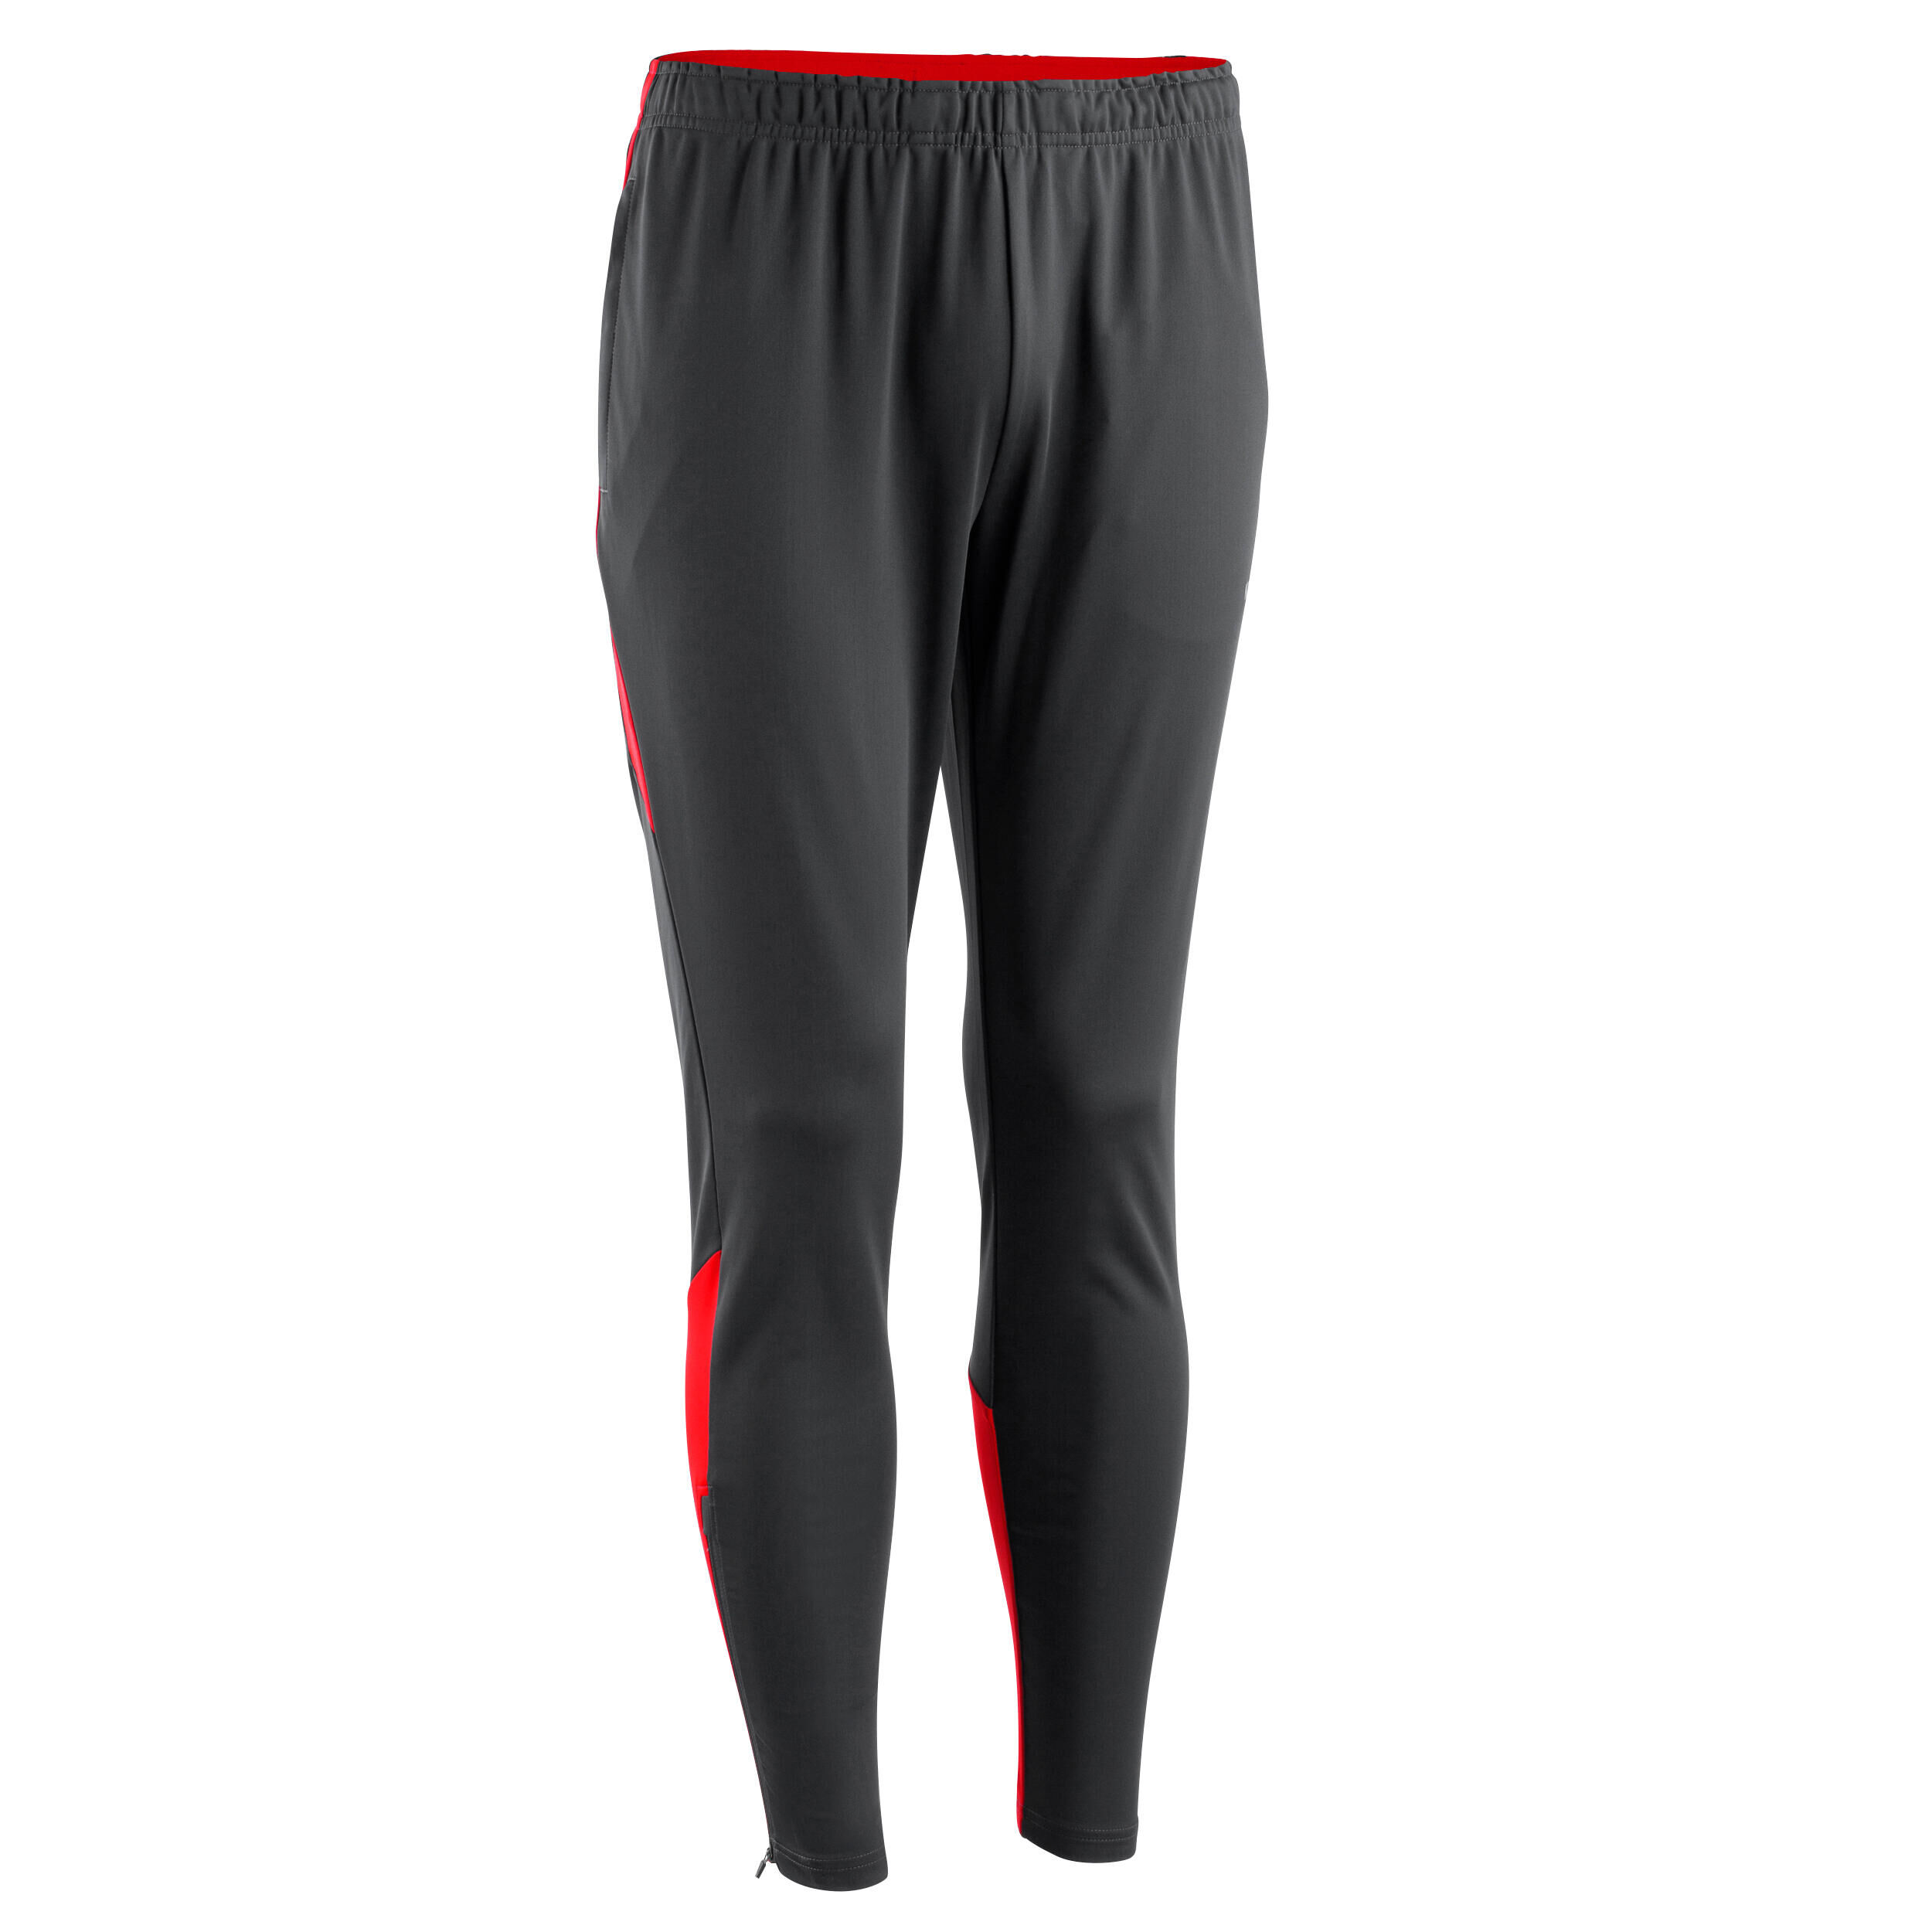 KIPSTA Football Bottoms Viralto Club - Anthracite Grey and Red